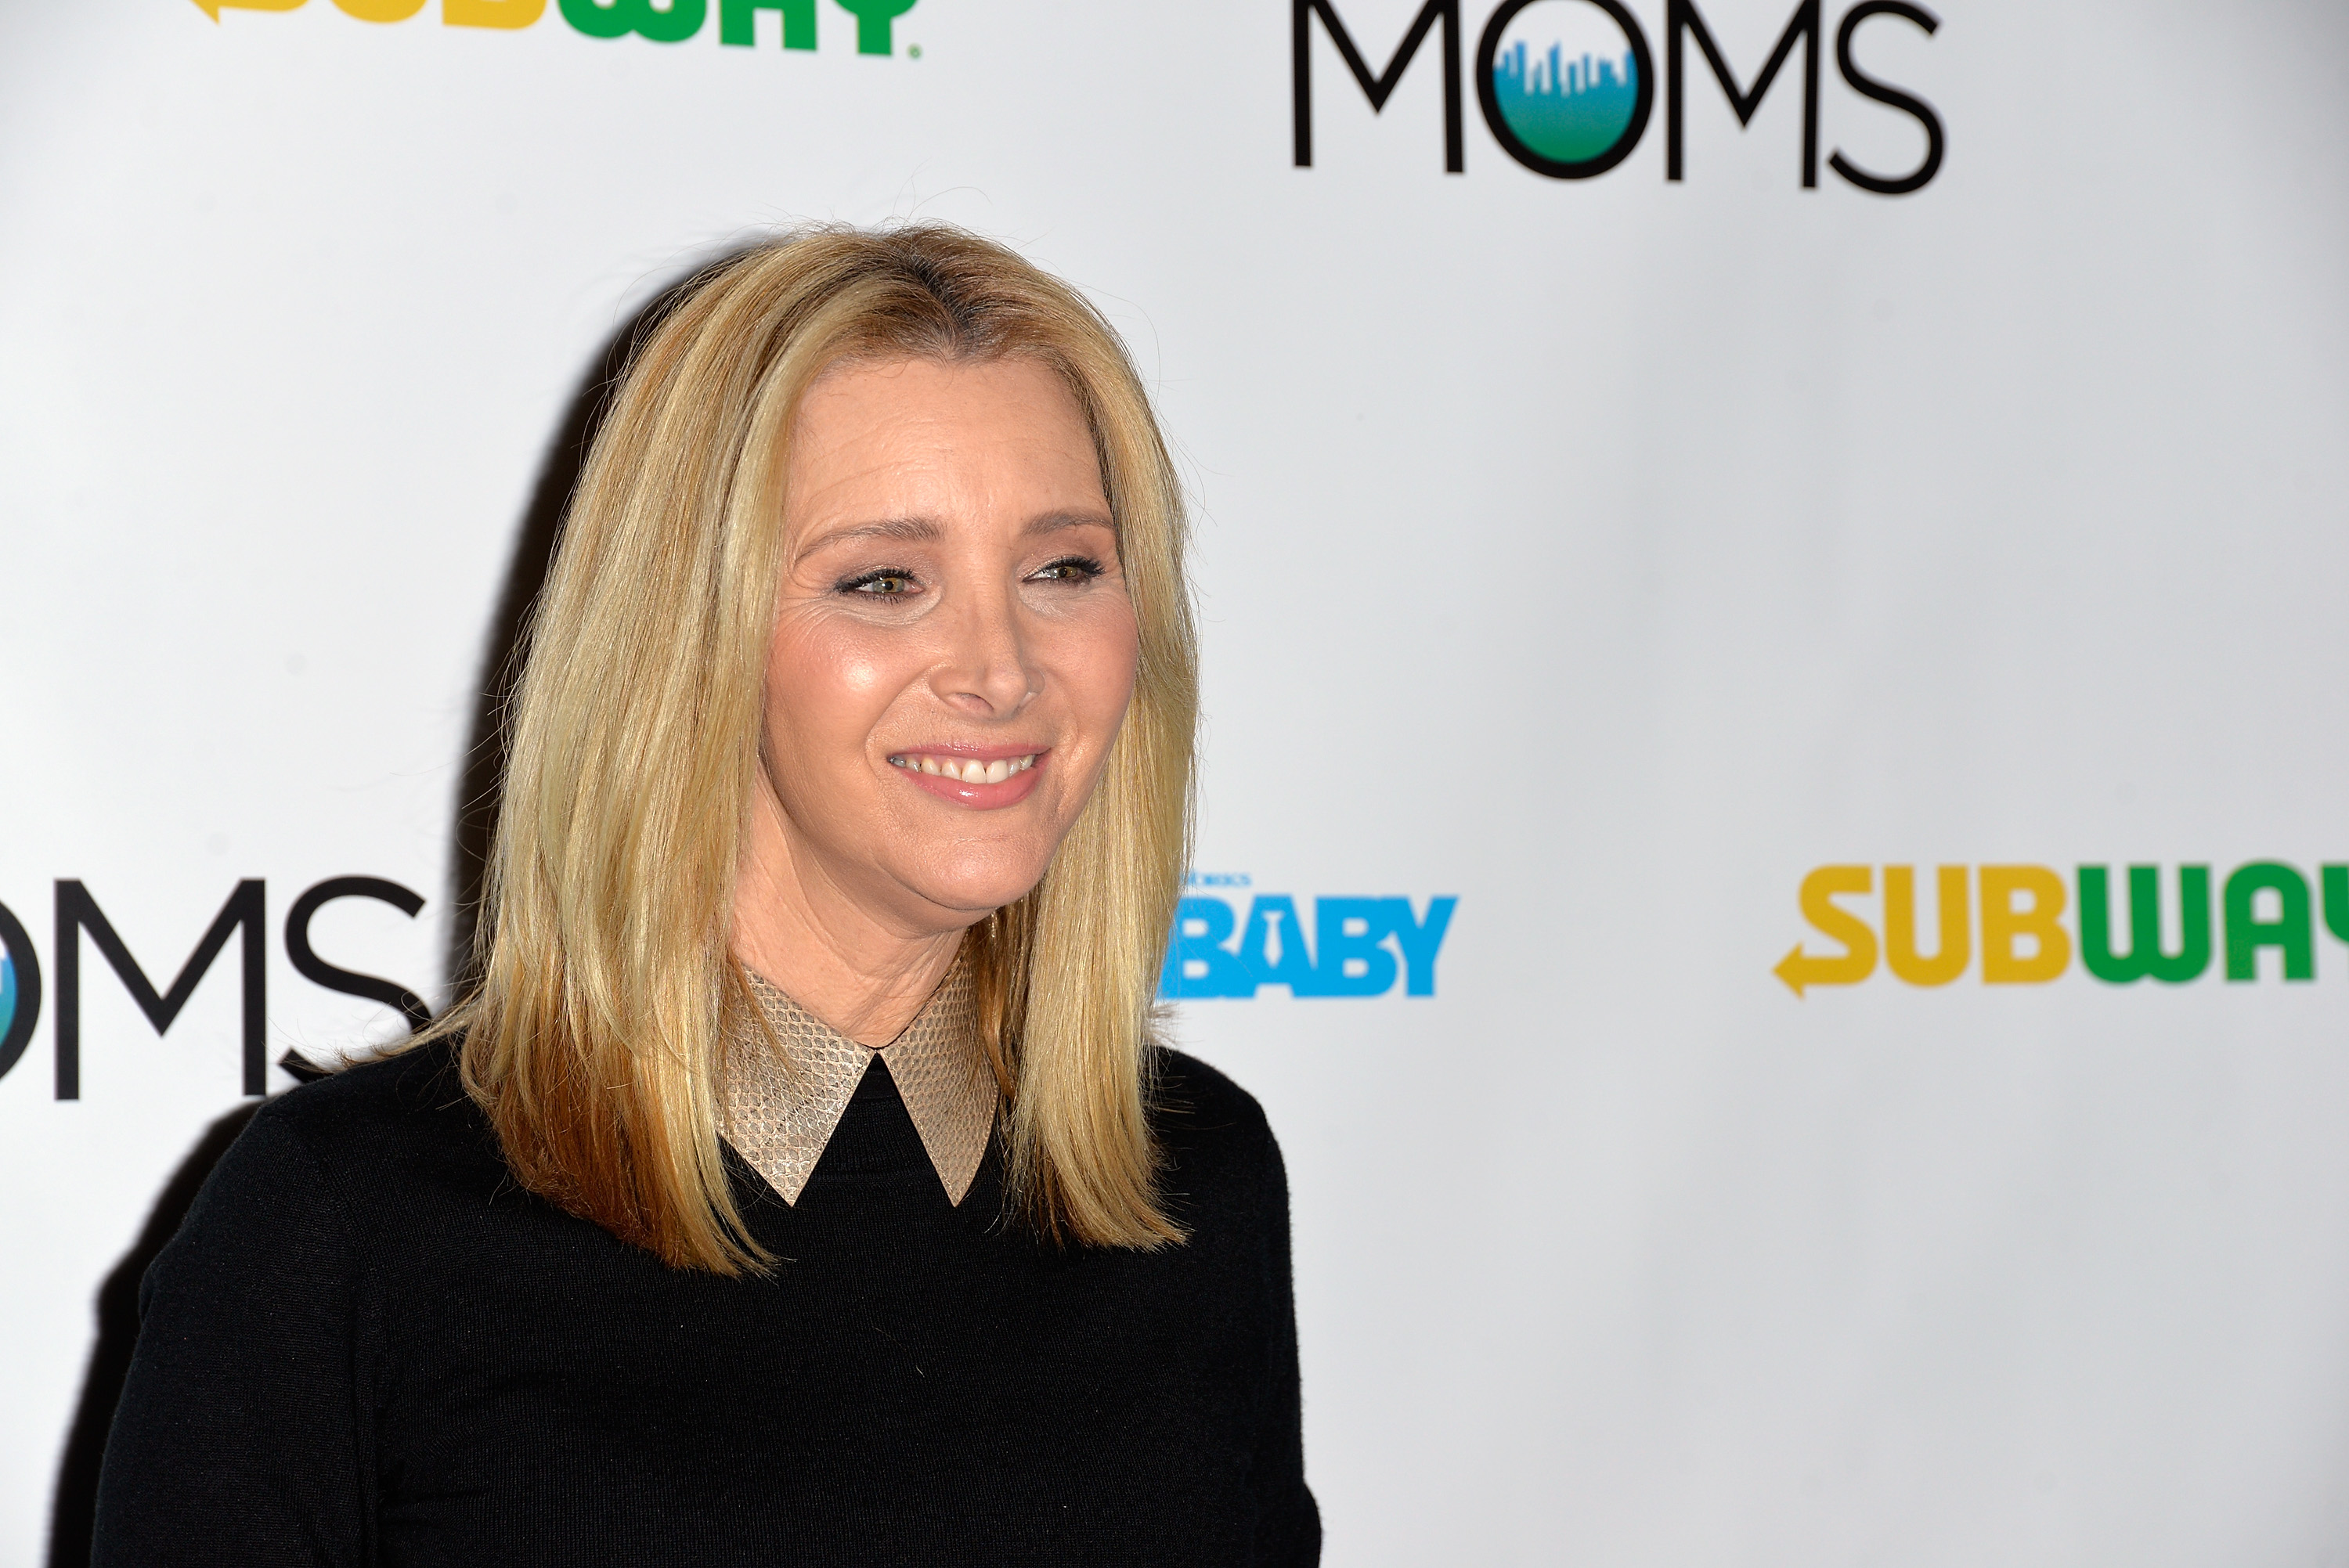 Lisa Kudrow during a Mamarazzi event for the film "Boss Baby" in Los Angeles, California on March 6, 2017 | Source: Getty Images